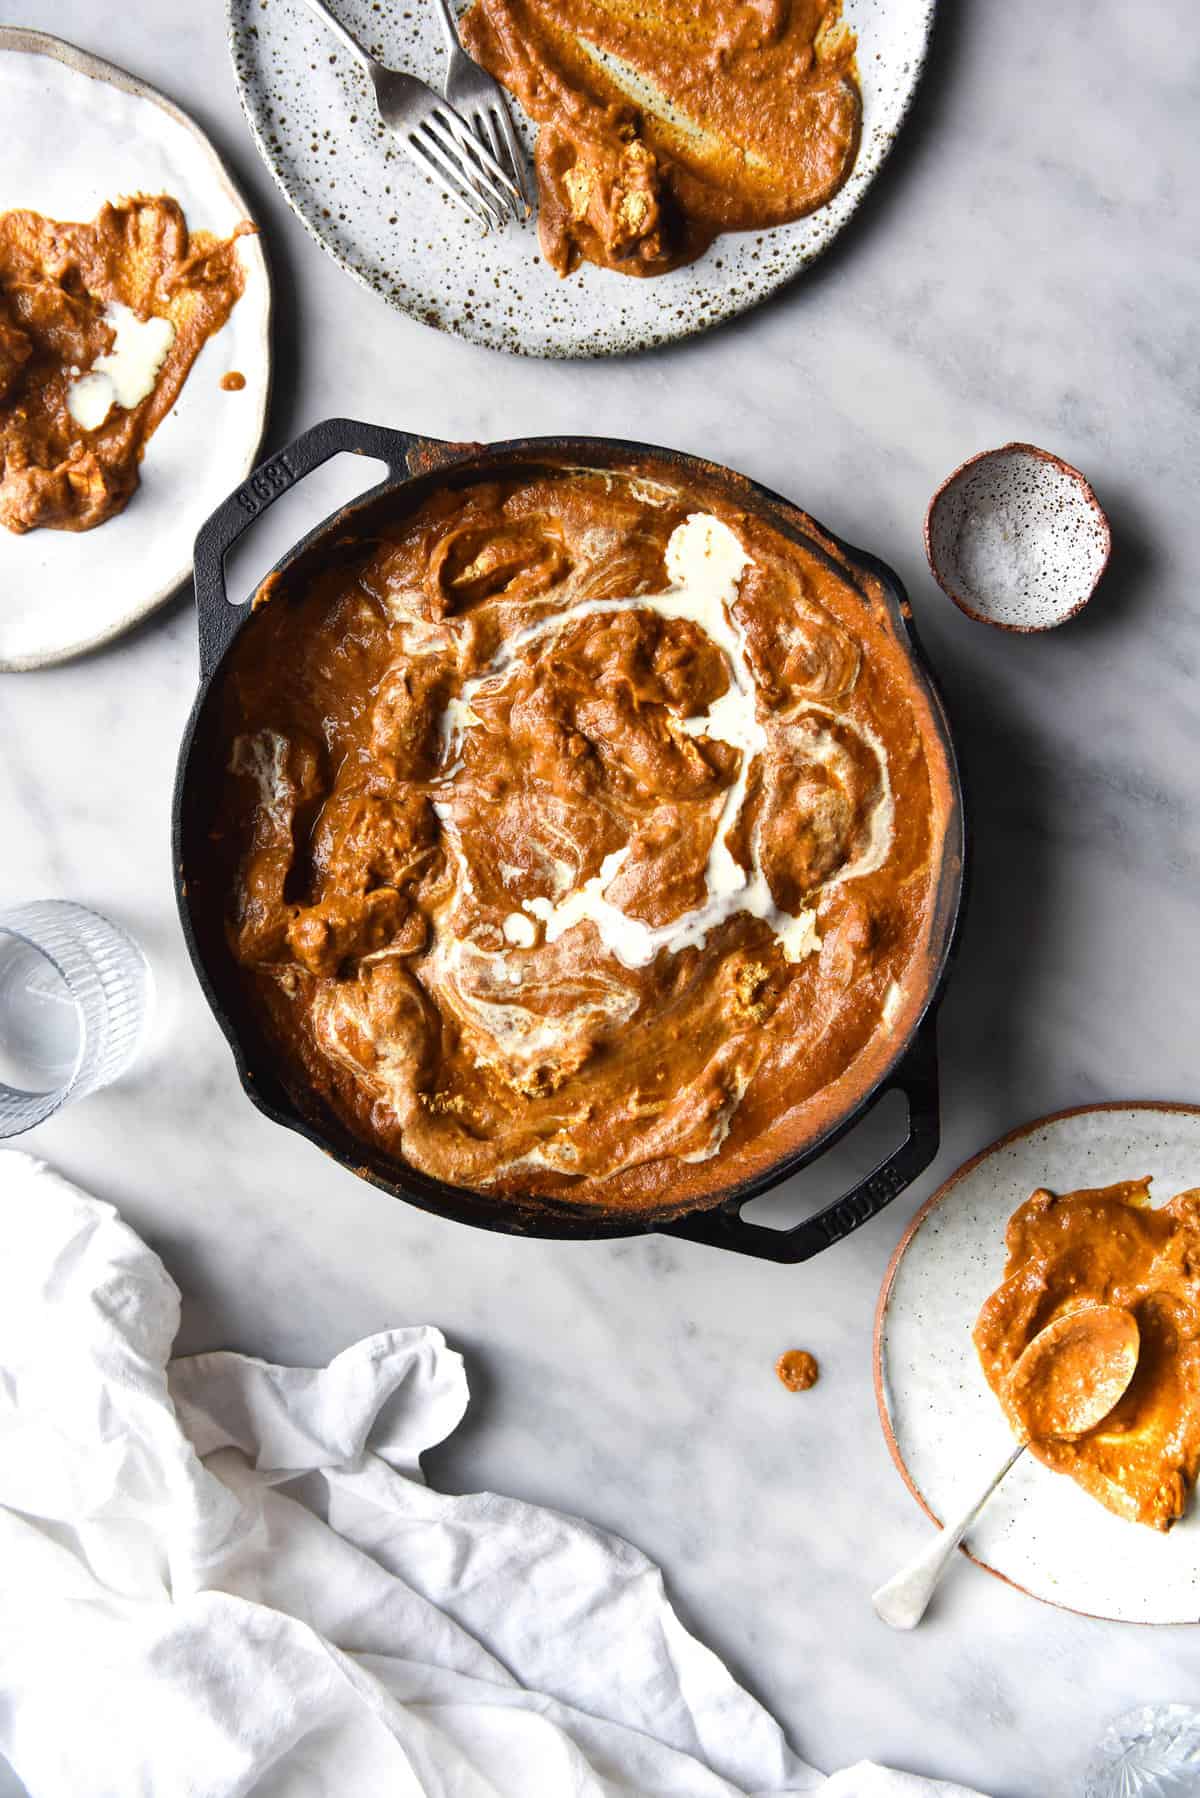 An aerial view of a skillet filled with FODMAP friendly curry that has been topped with a swirl of cream. The skillet sits atop a white marble table which is surrounded by plates of curry, water glasses and a white linen tablecloth.